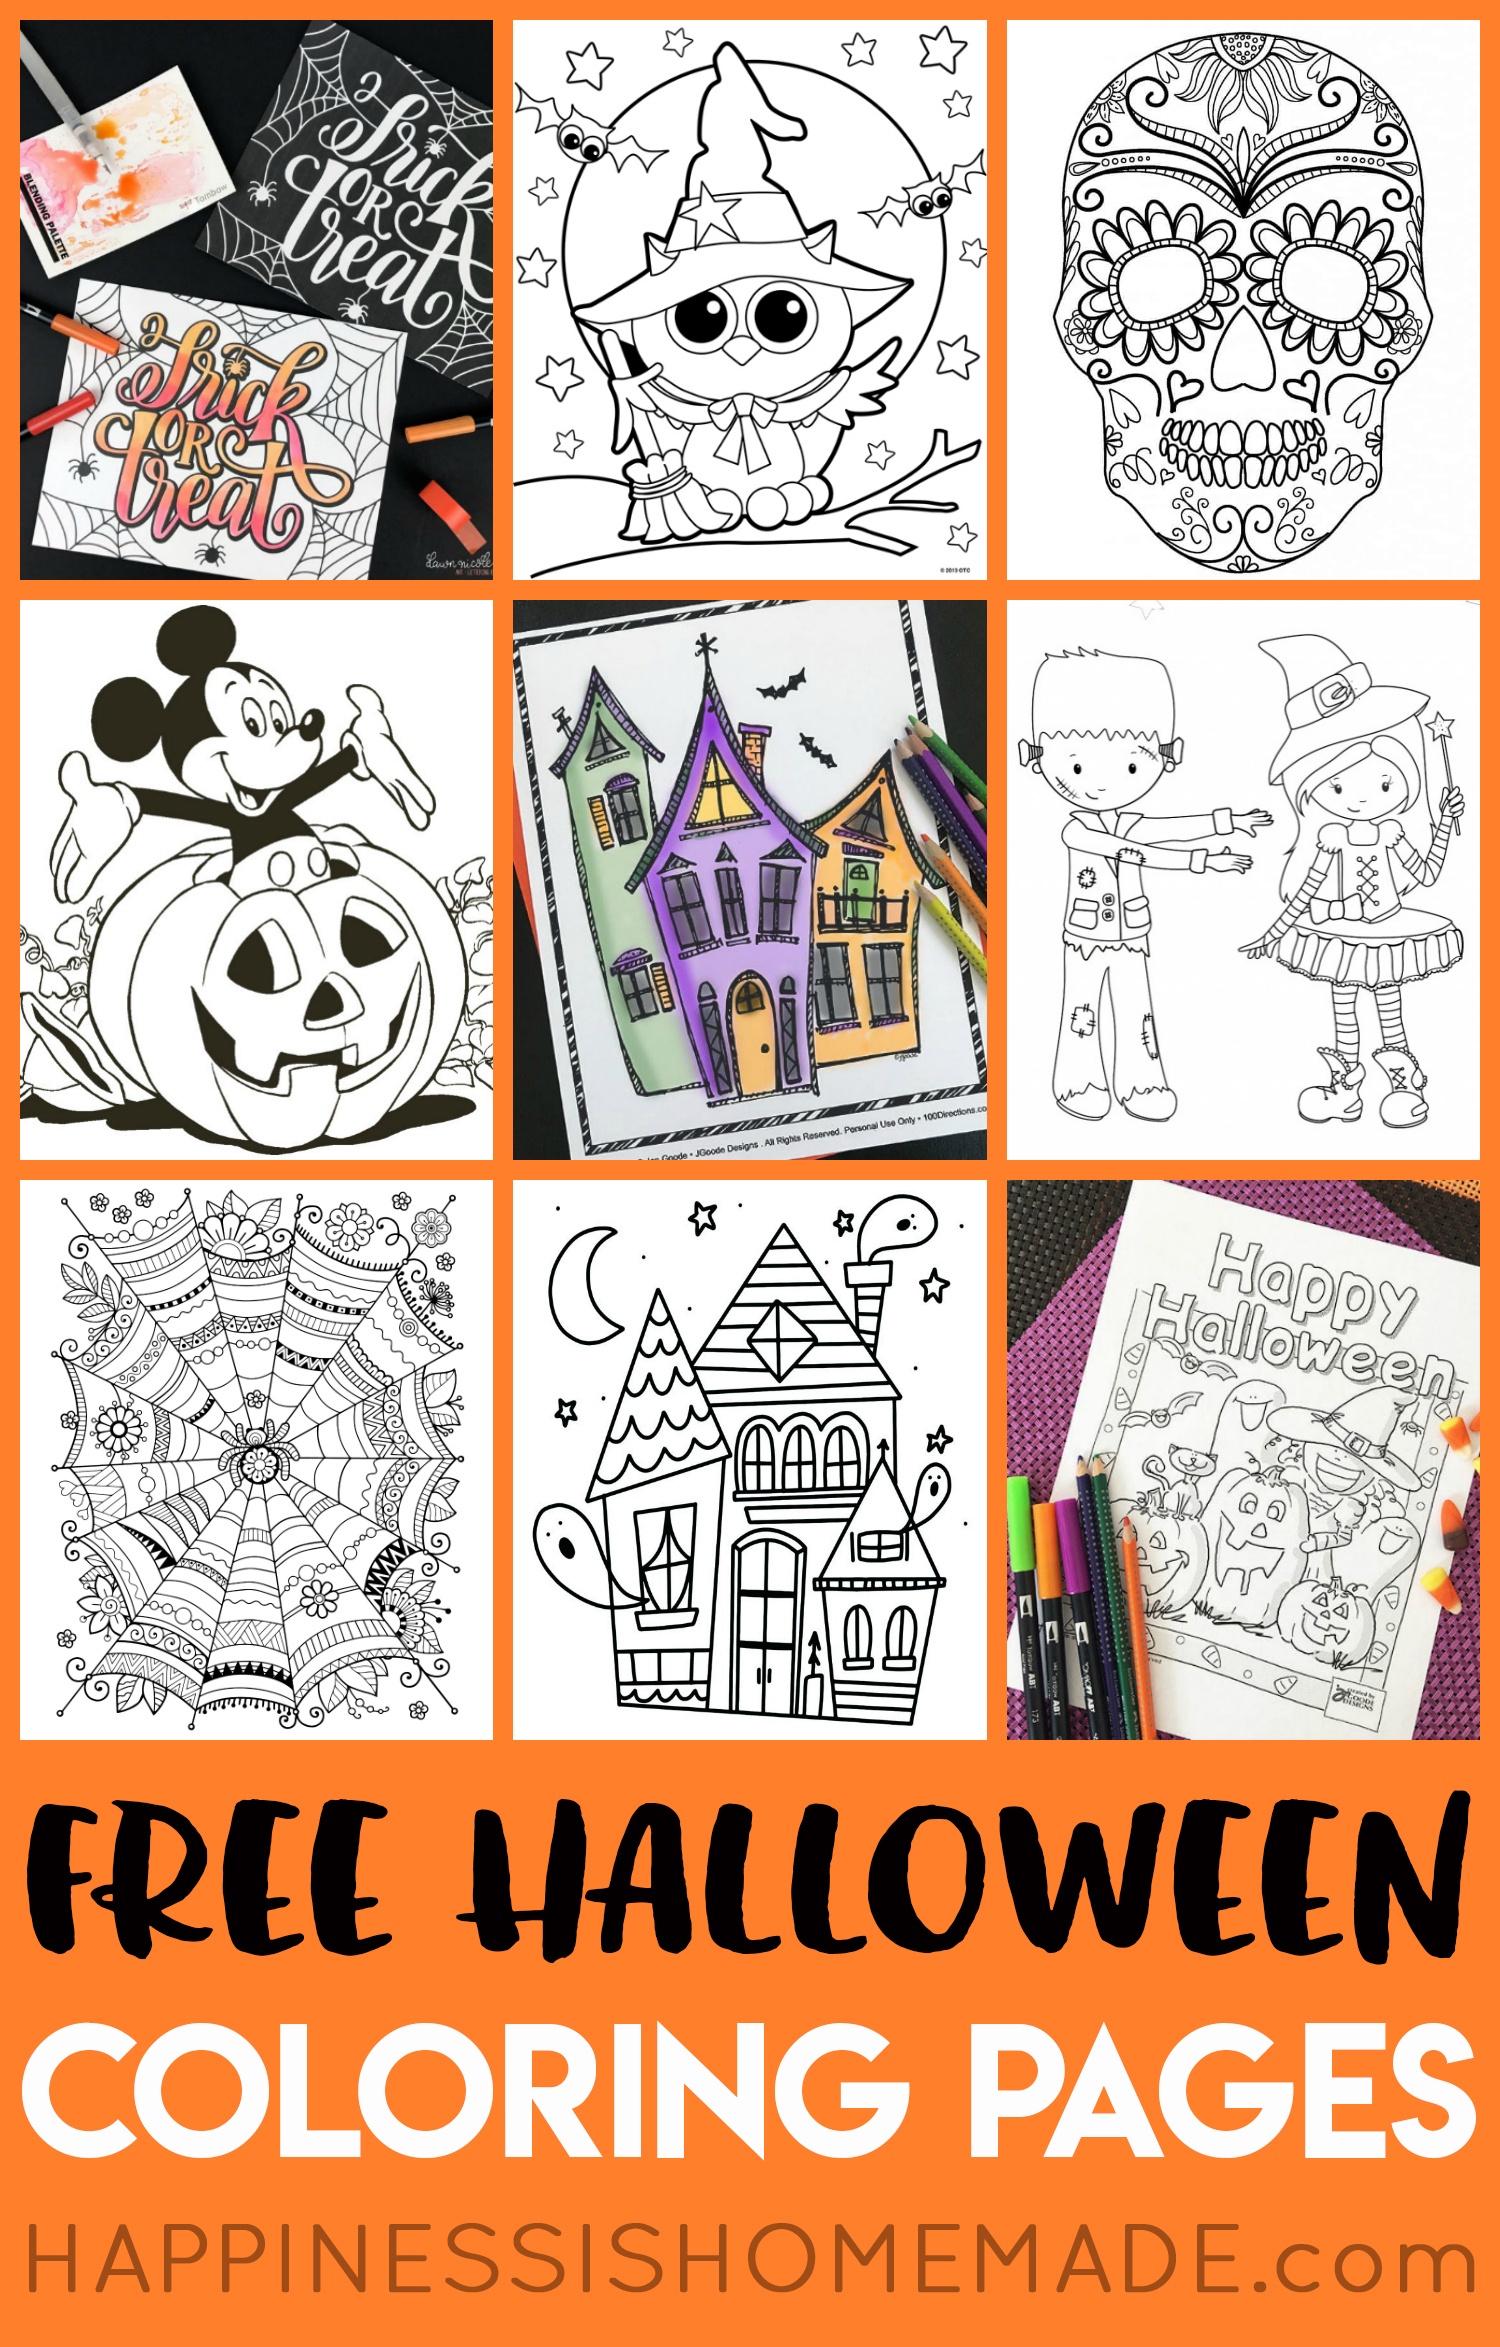 Free Halloween Coloring Pages For Adults &amp;amp; Kids - Happiness Is Homemade - Printable Halloween Cards To Color For Free